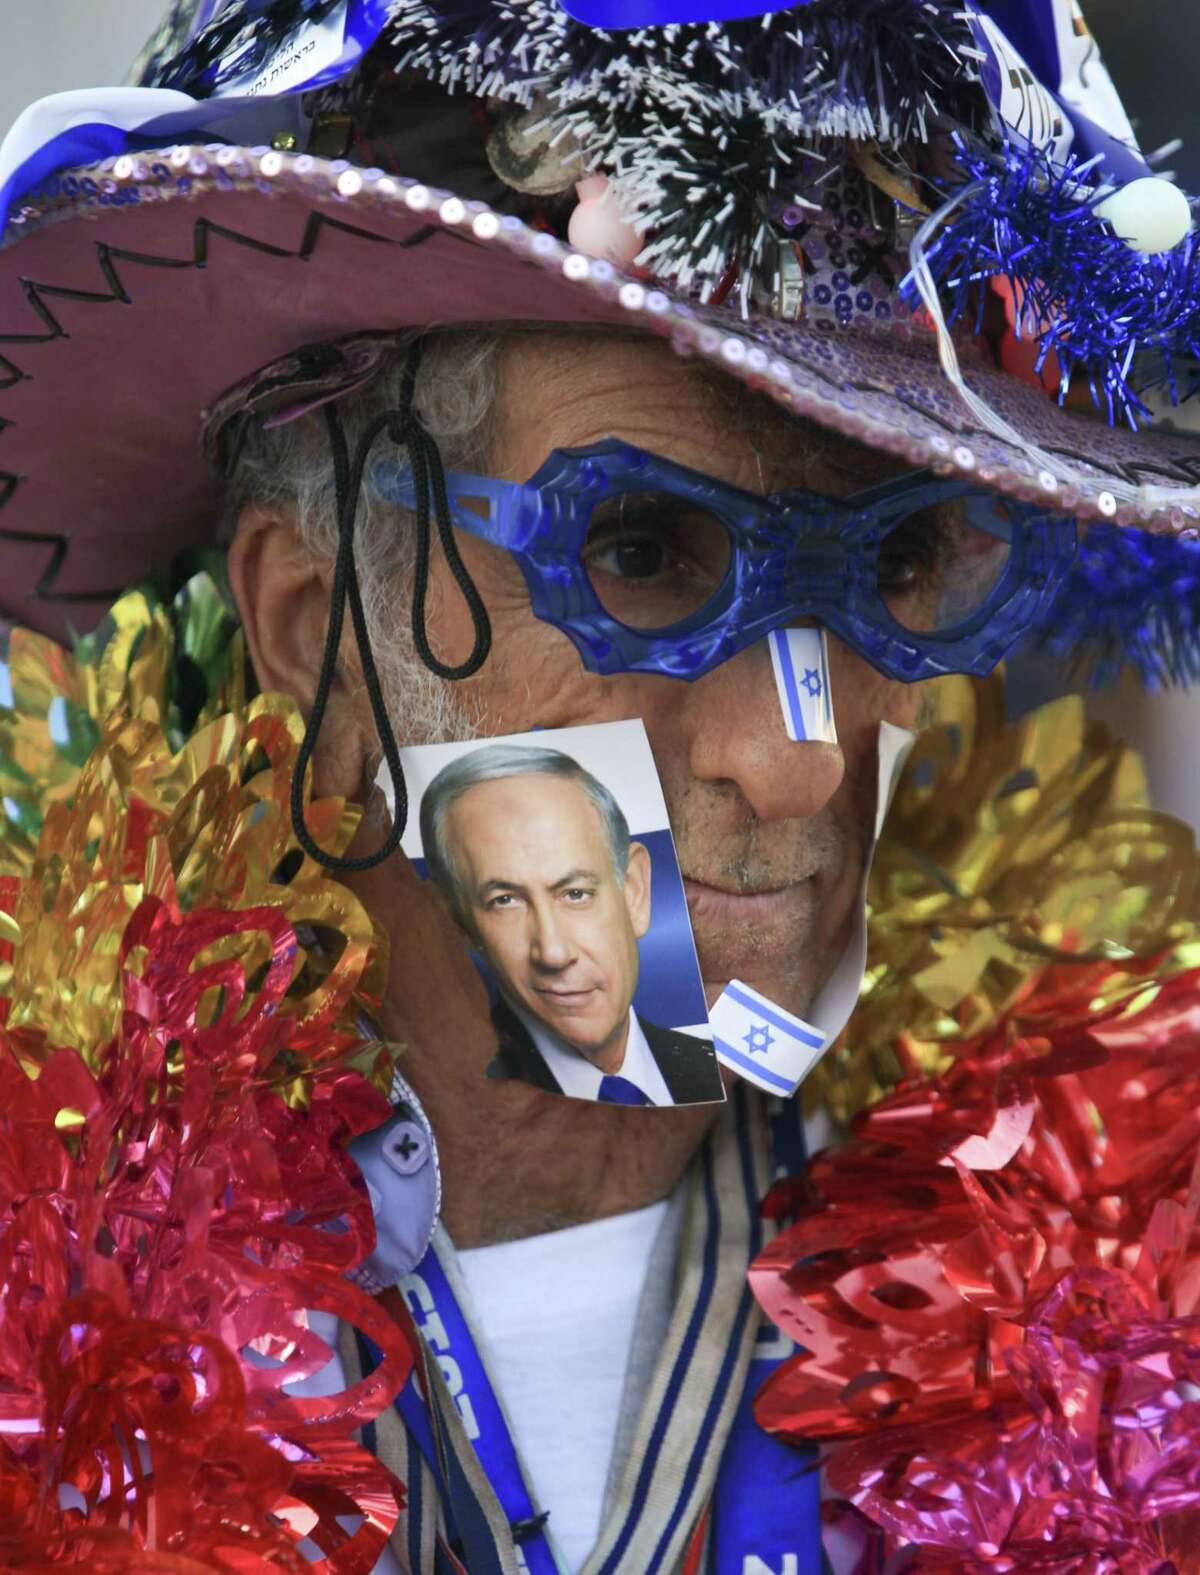 A supporter of Israeli Prime Minister Benjamin Netanyahu, on the photo, waits for his campaign rally to start in Tel Aviv, Israel, Sunday, March 15, 2015, two days ahead of parliament elections. Netanyahu seeks his fourth term as prime minister. (AP Photo/Oded Balilty)